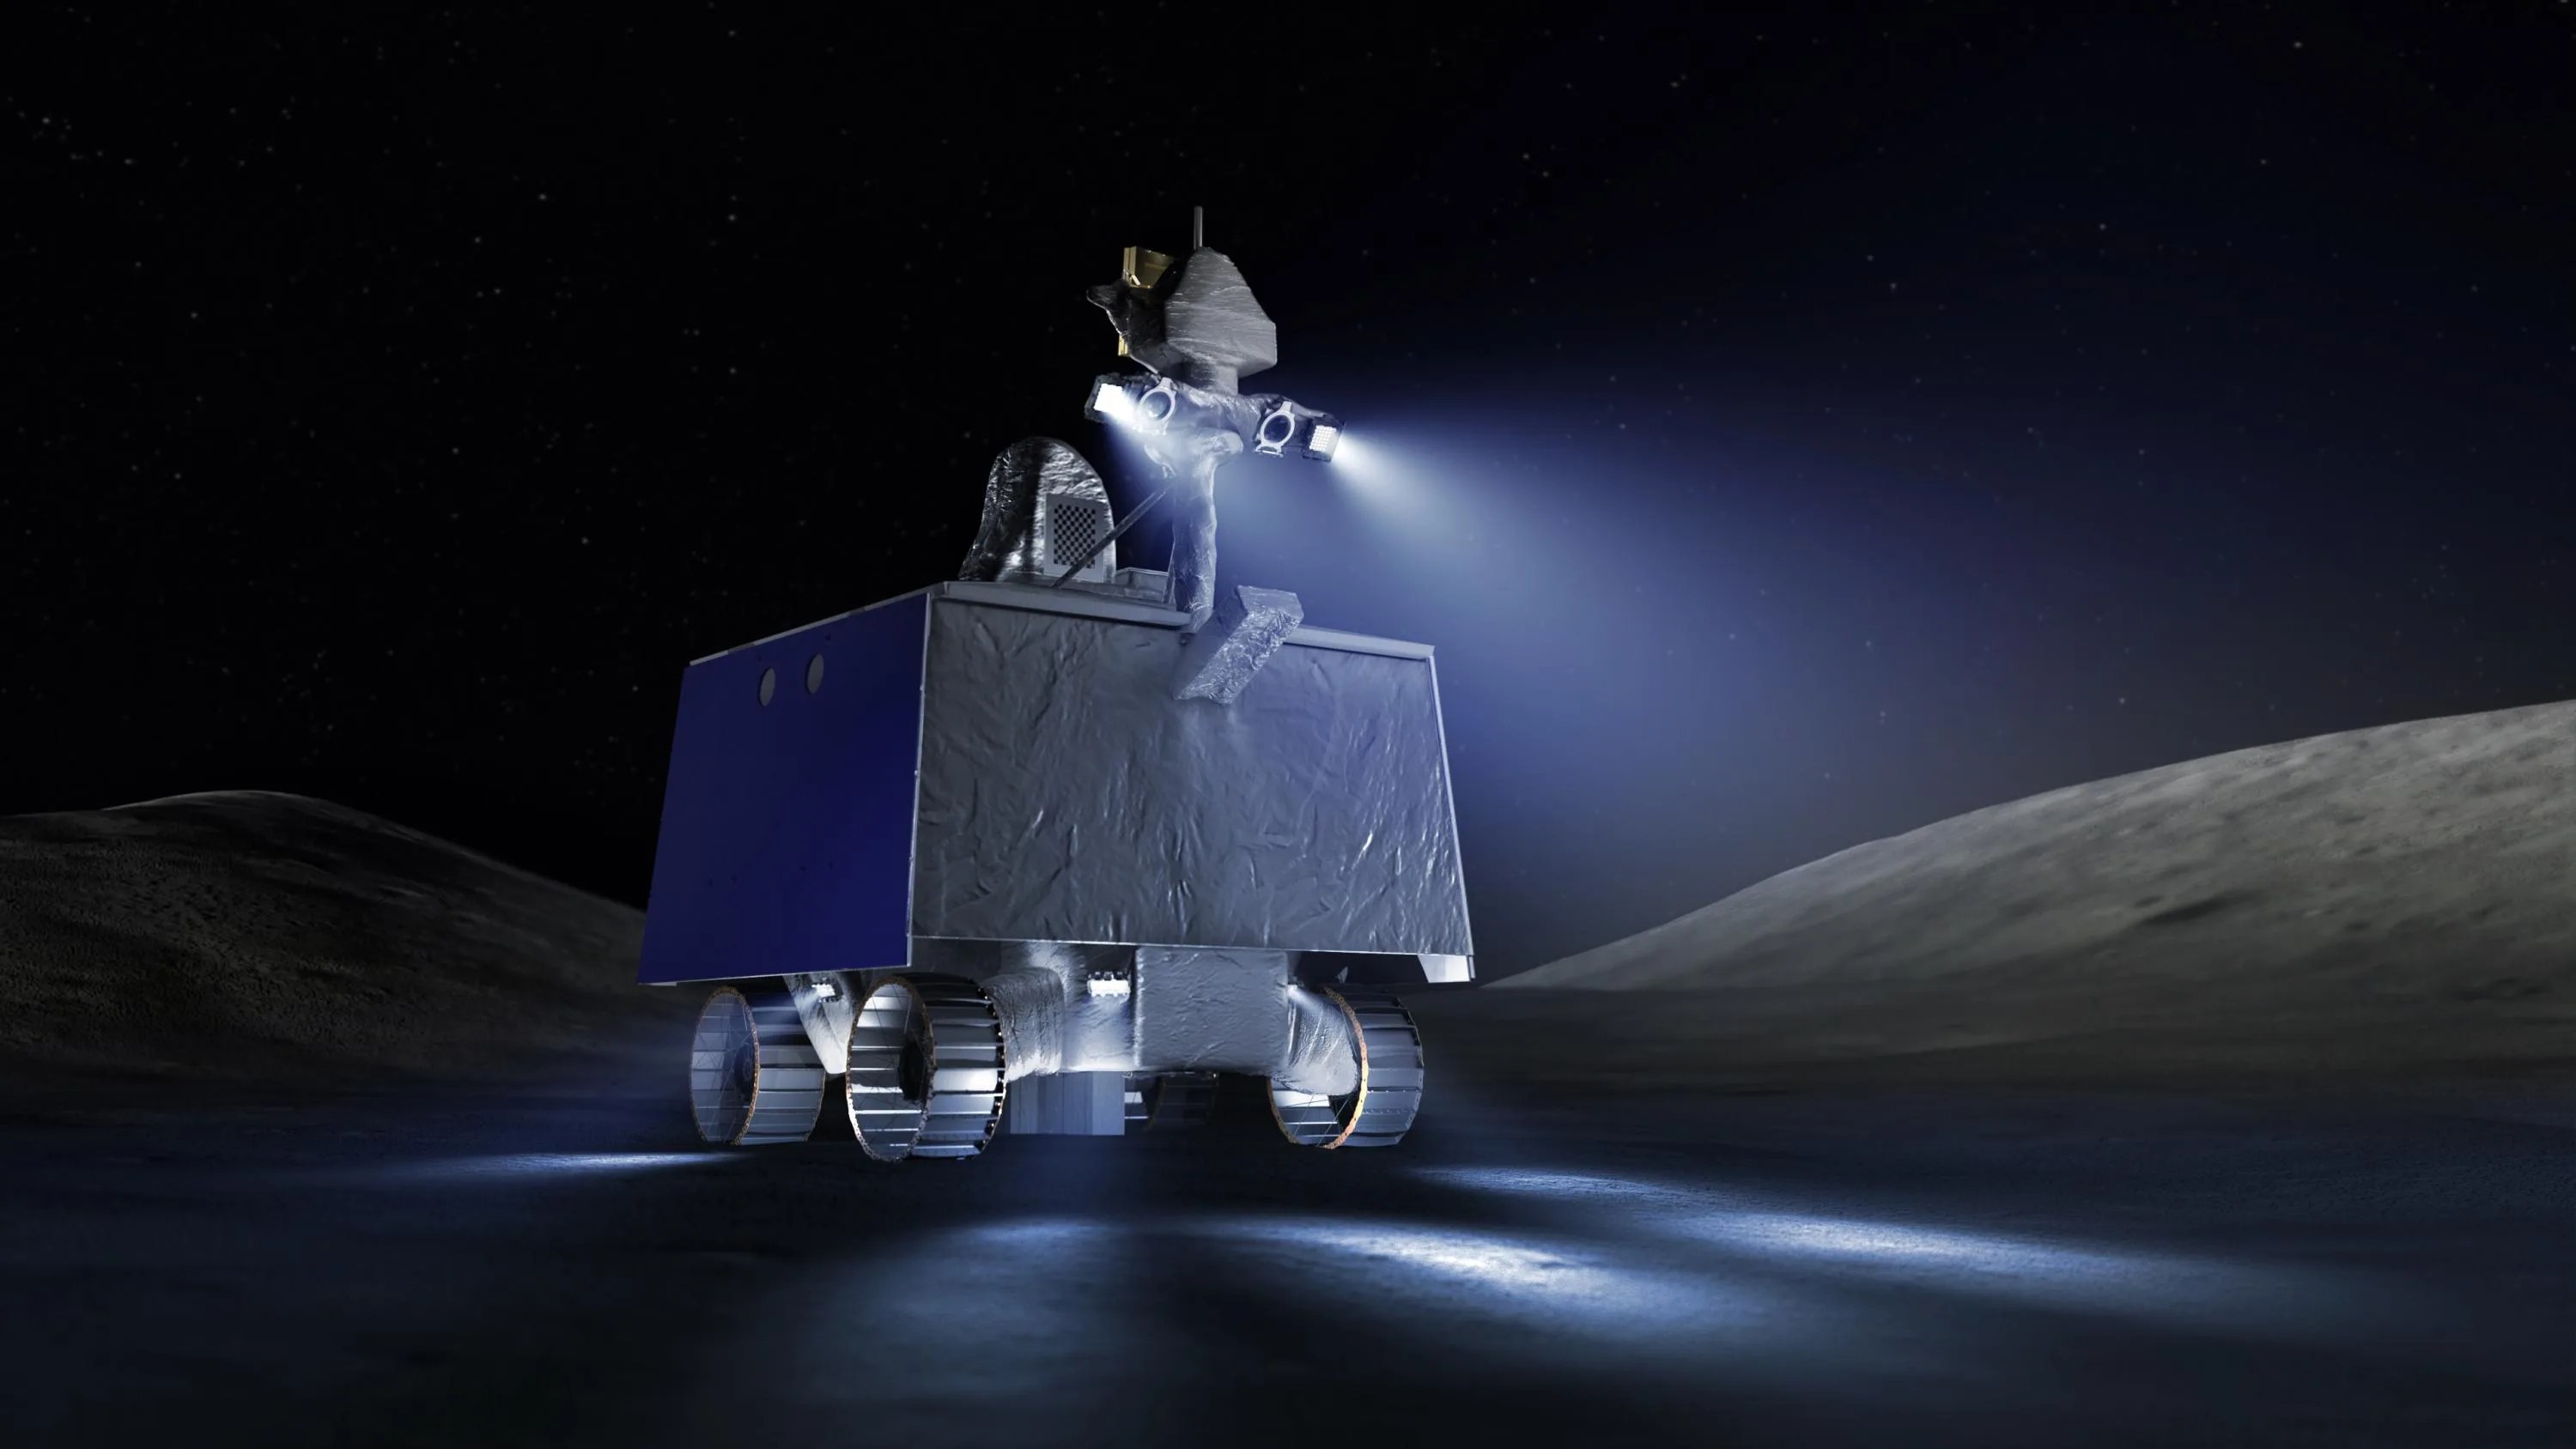 A graphic illustration of the rover known as VIPER. It is mostly grey with blue siding and the central structure is box-like. Four wheels are underneath the rover, which will help it traverse the lunar south pole. Mounted on top of the rover are a couple of additional small structures as well as lights that will shine the way in permanently shadowed regions (PSRS). In the background is a simulation of the Moon’s surface surrounded by black space.